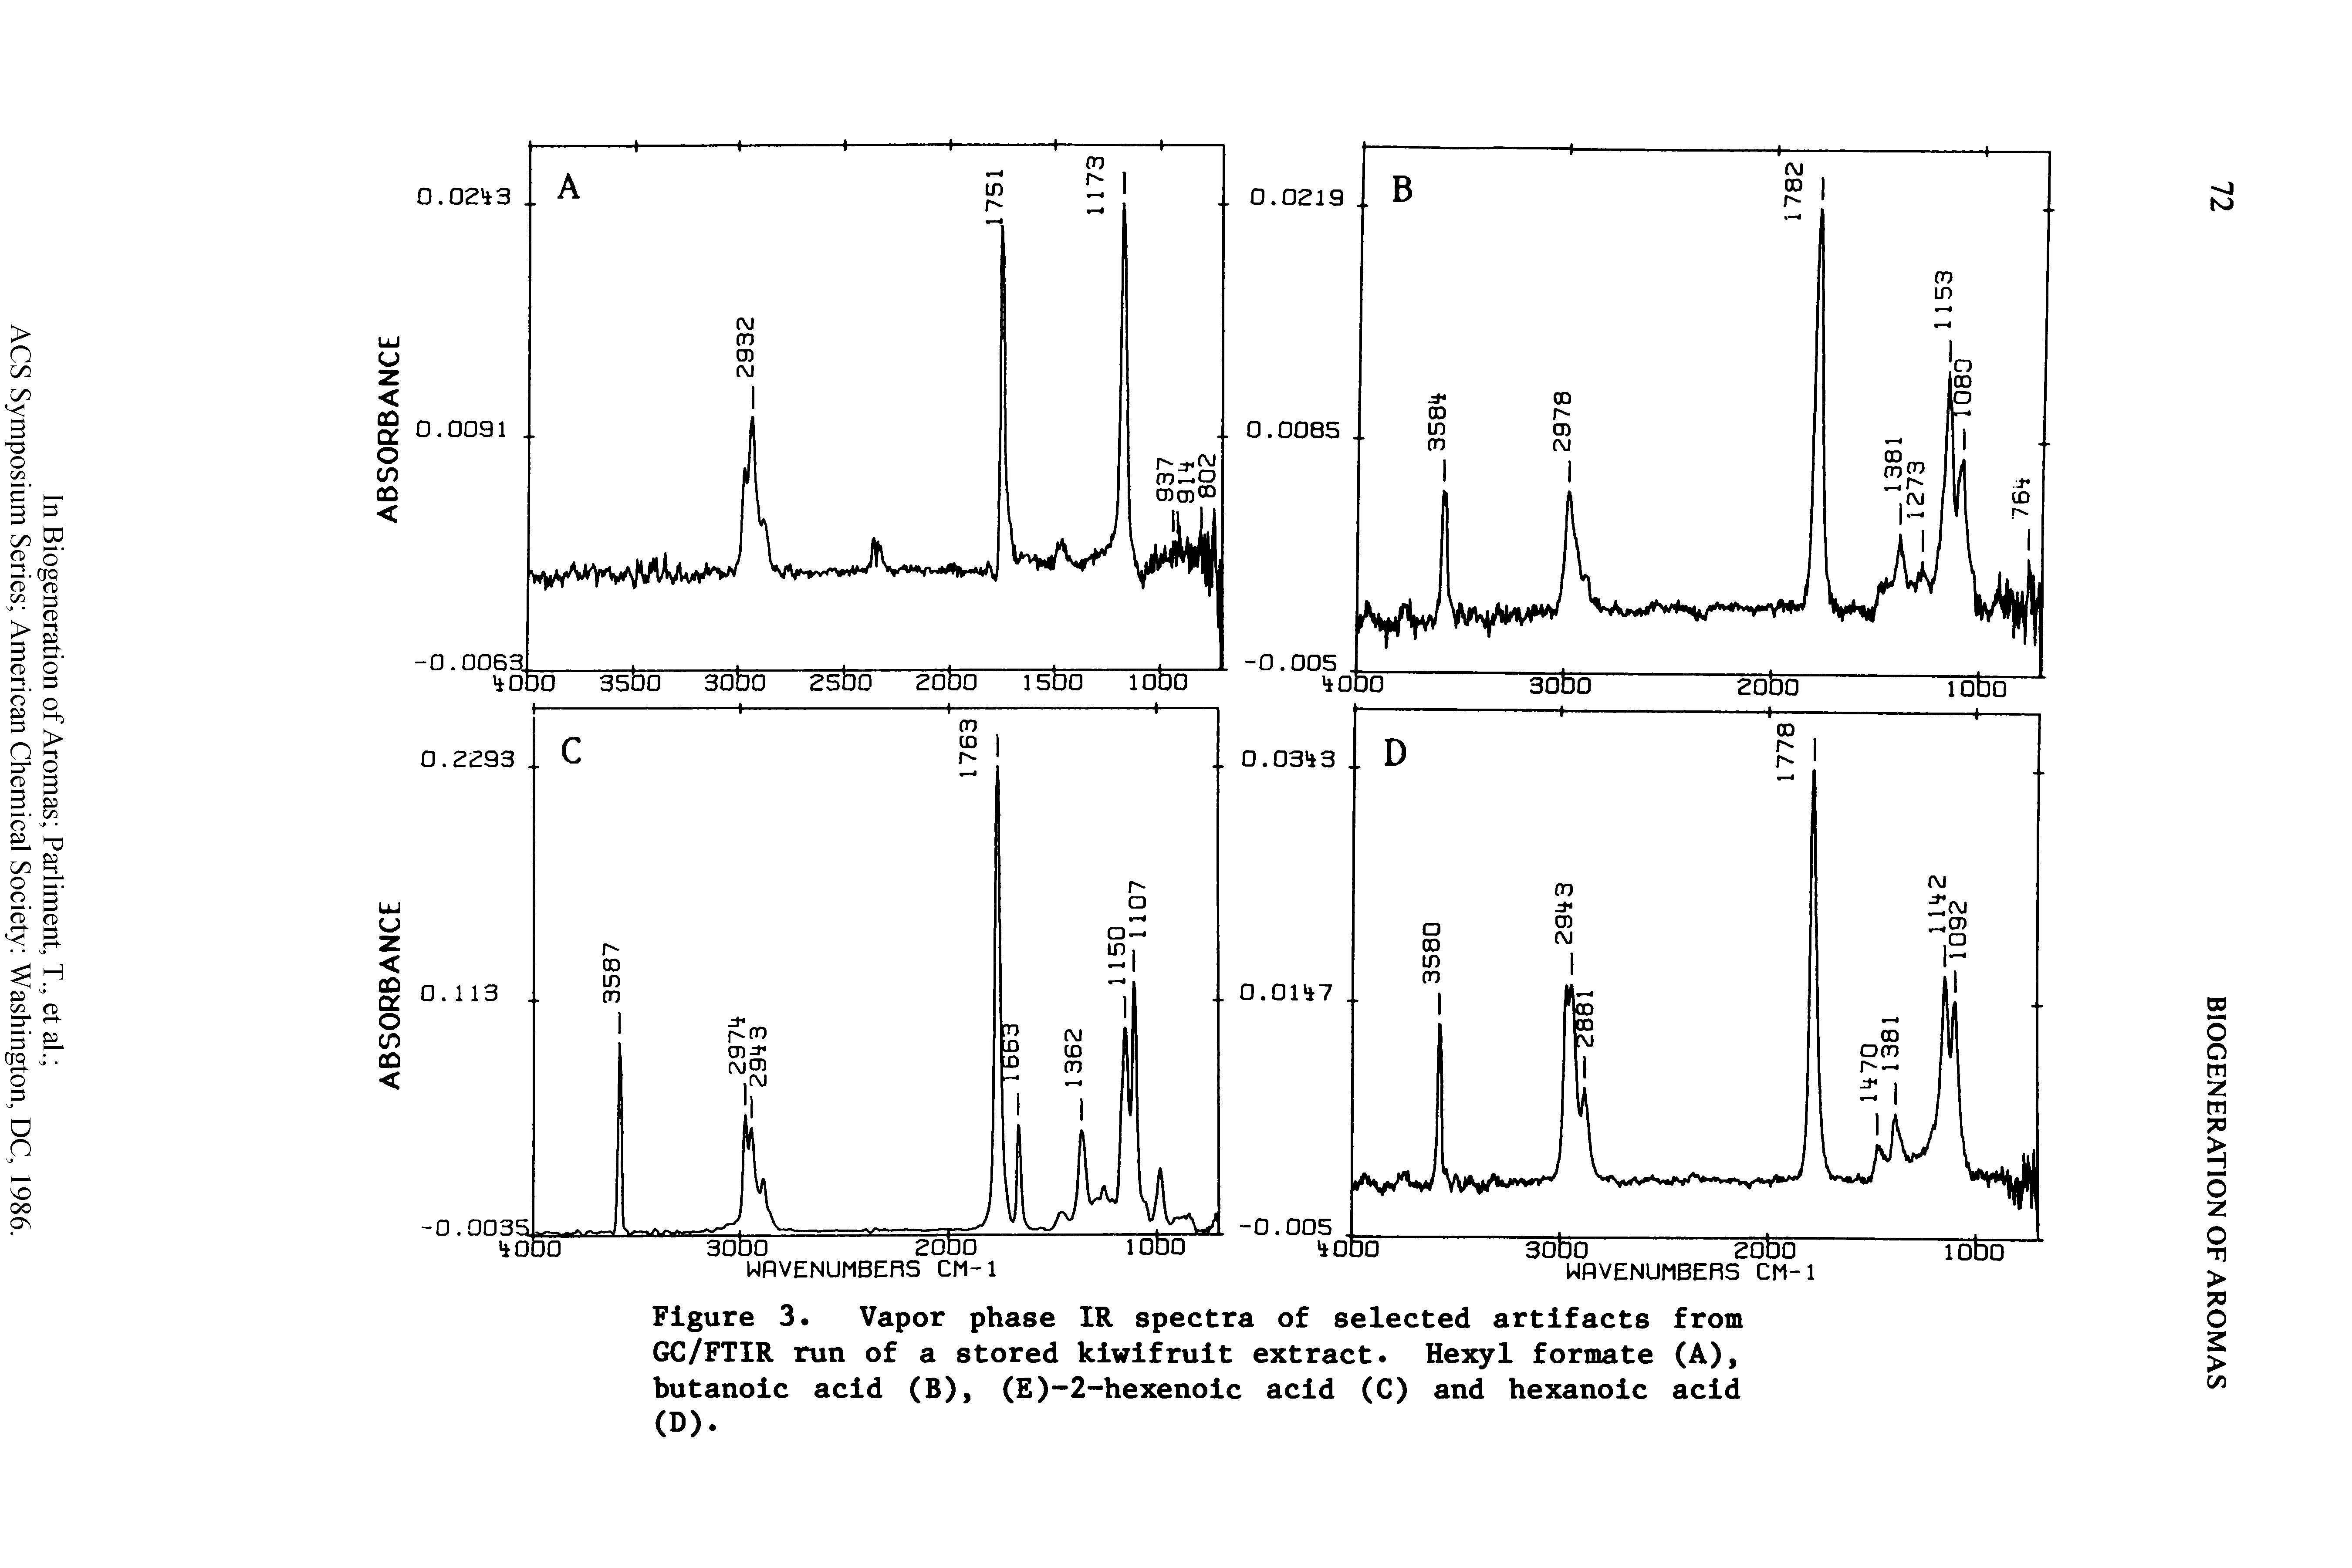 Figure 3. Vapor phase IR spectra of selected artifacts from GC/FTIR run of a stored kiwifruit extract. Hexyl formate (A), butanoic acid (B), (E)-2-hexenoic acid (C) and hexanoic acid (D).